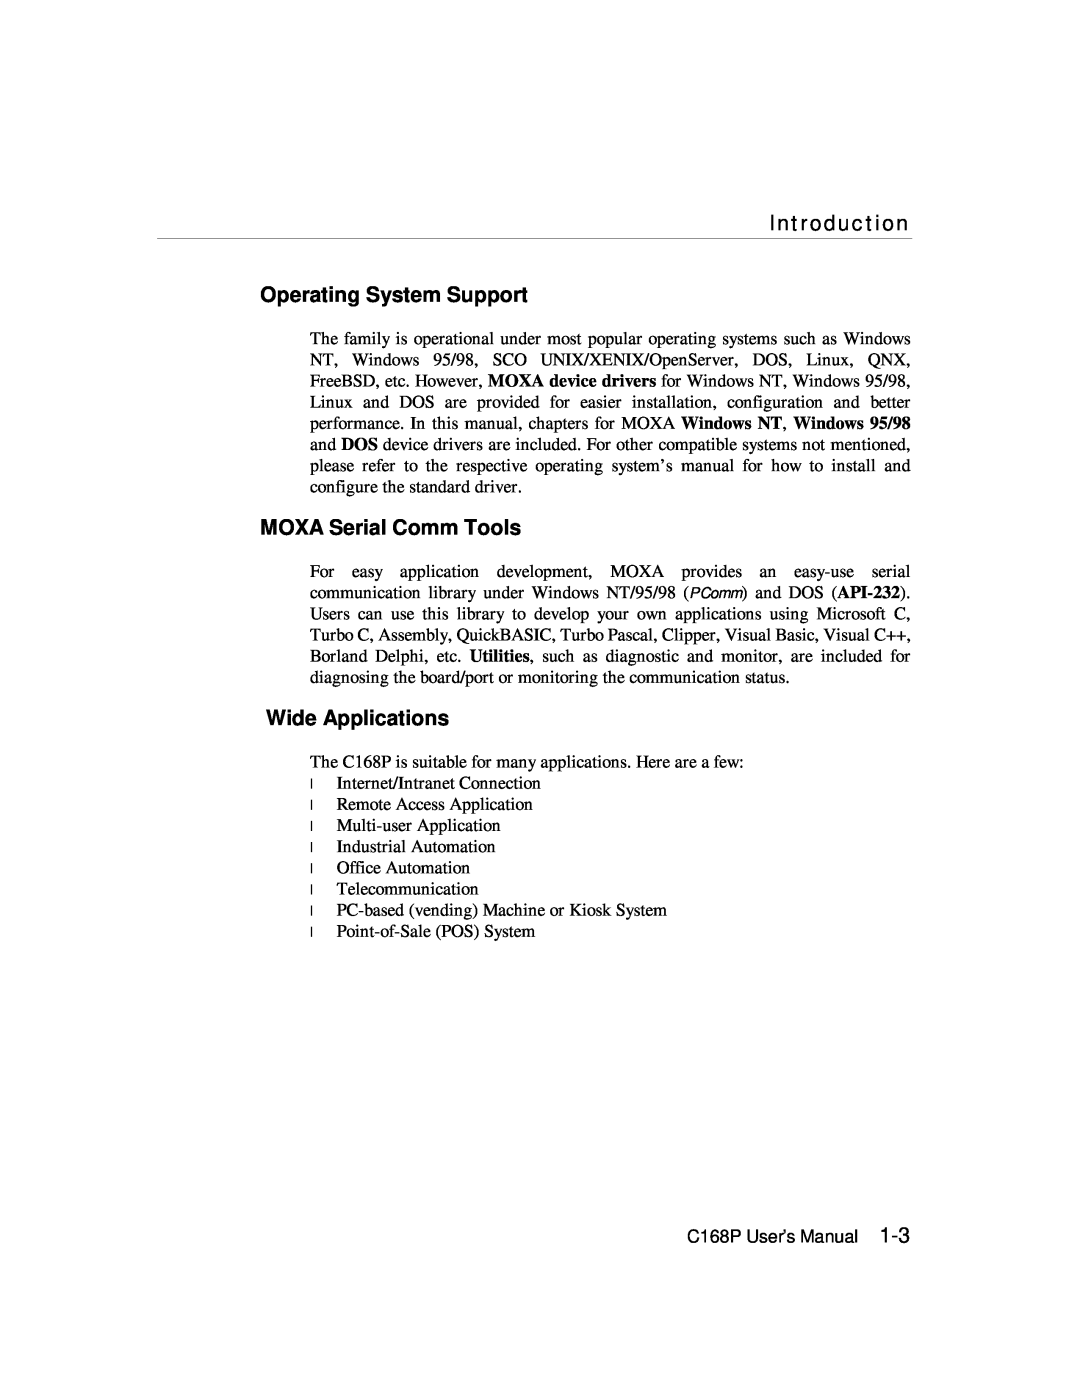 Moxa Technologies C168P user manual Introduction, Operating System Support, MOXA Serial Comm Tools, Wide Applications 